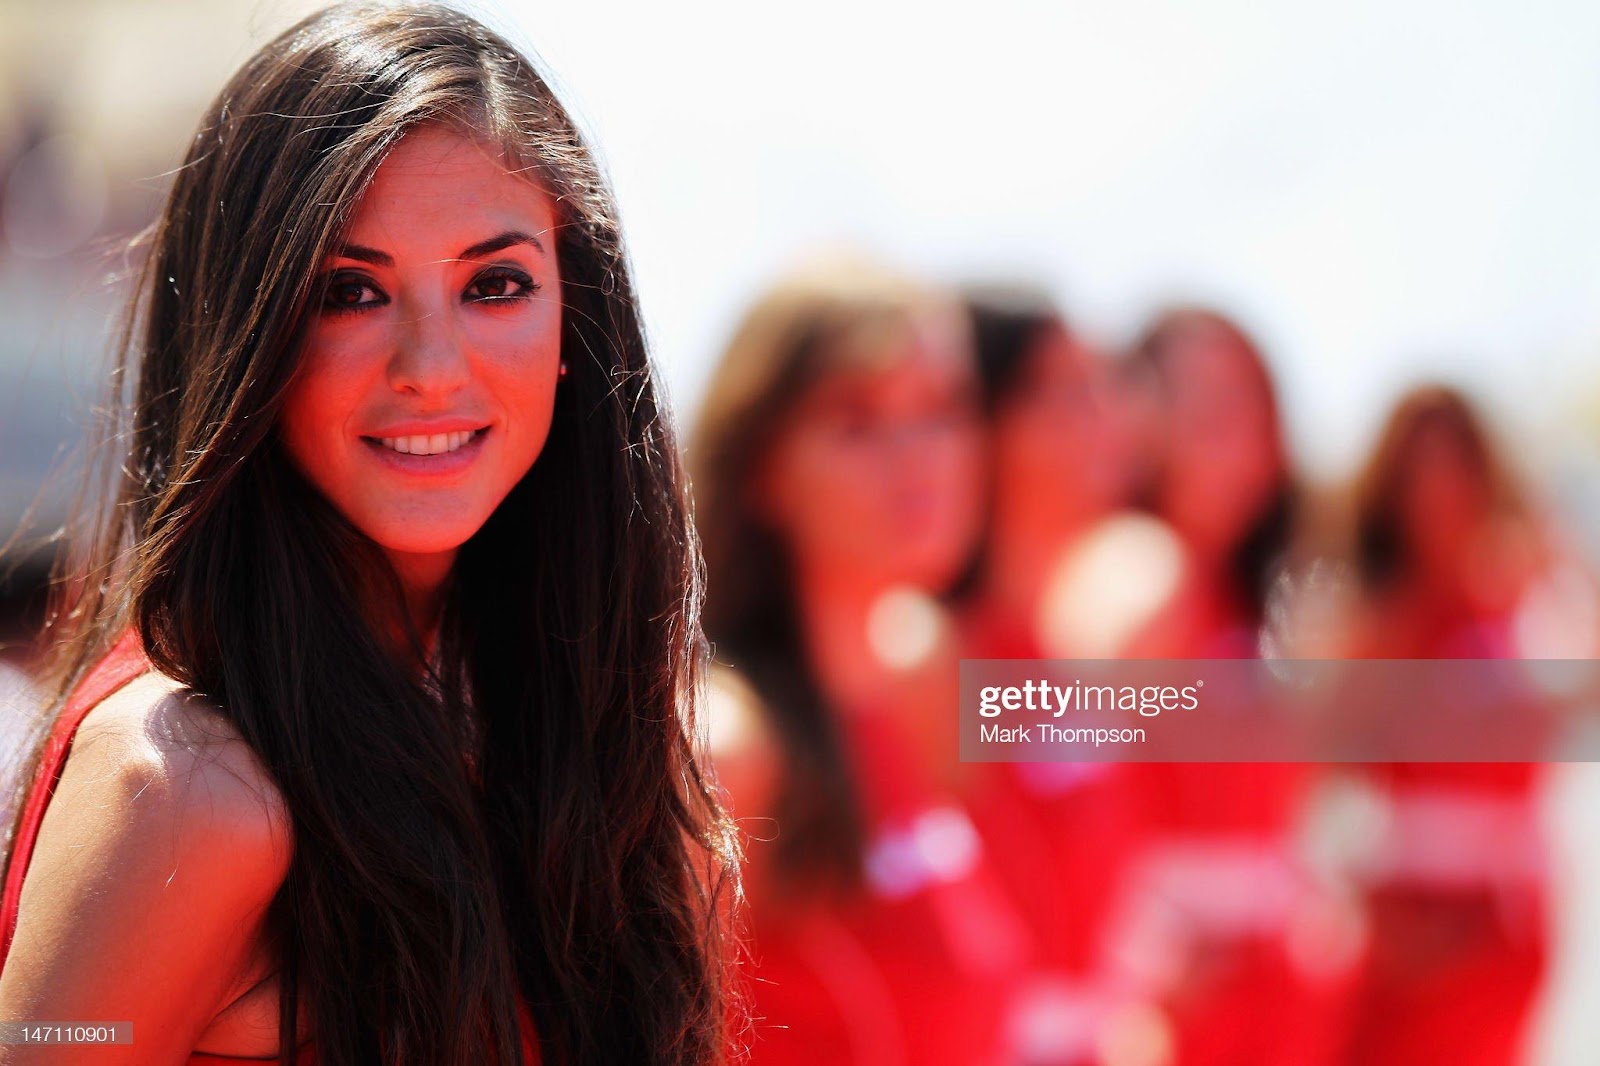 D:\Documenti\posts\posts\Women and motorsport\foto\Getty e altre\Valencia\grid-girl-is-seen-before-the-european-grand-prix-at-the-valencia-on-picture-id147110901.jpg